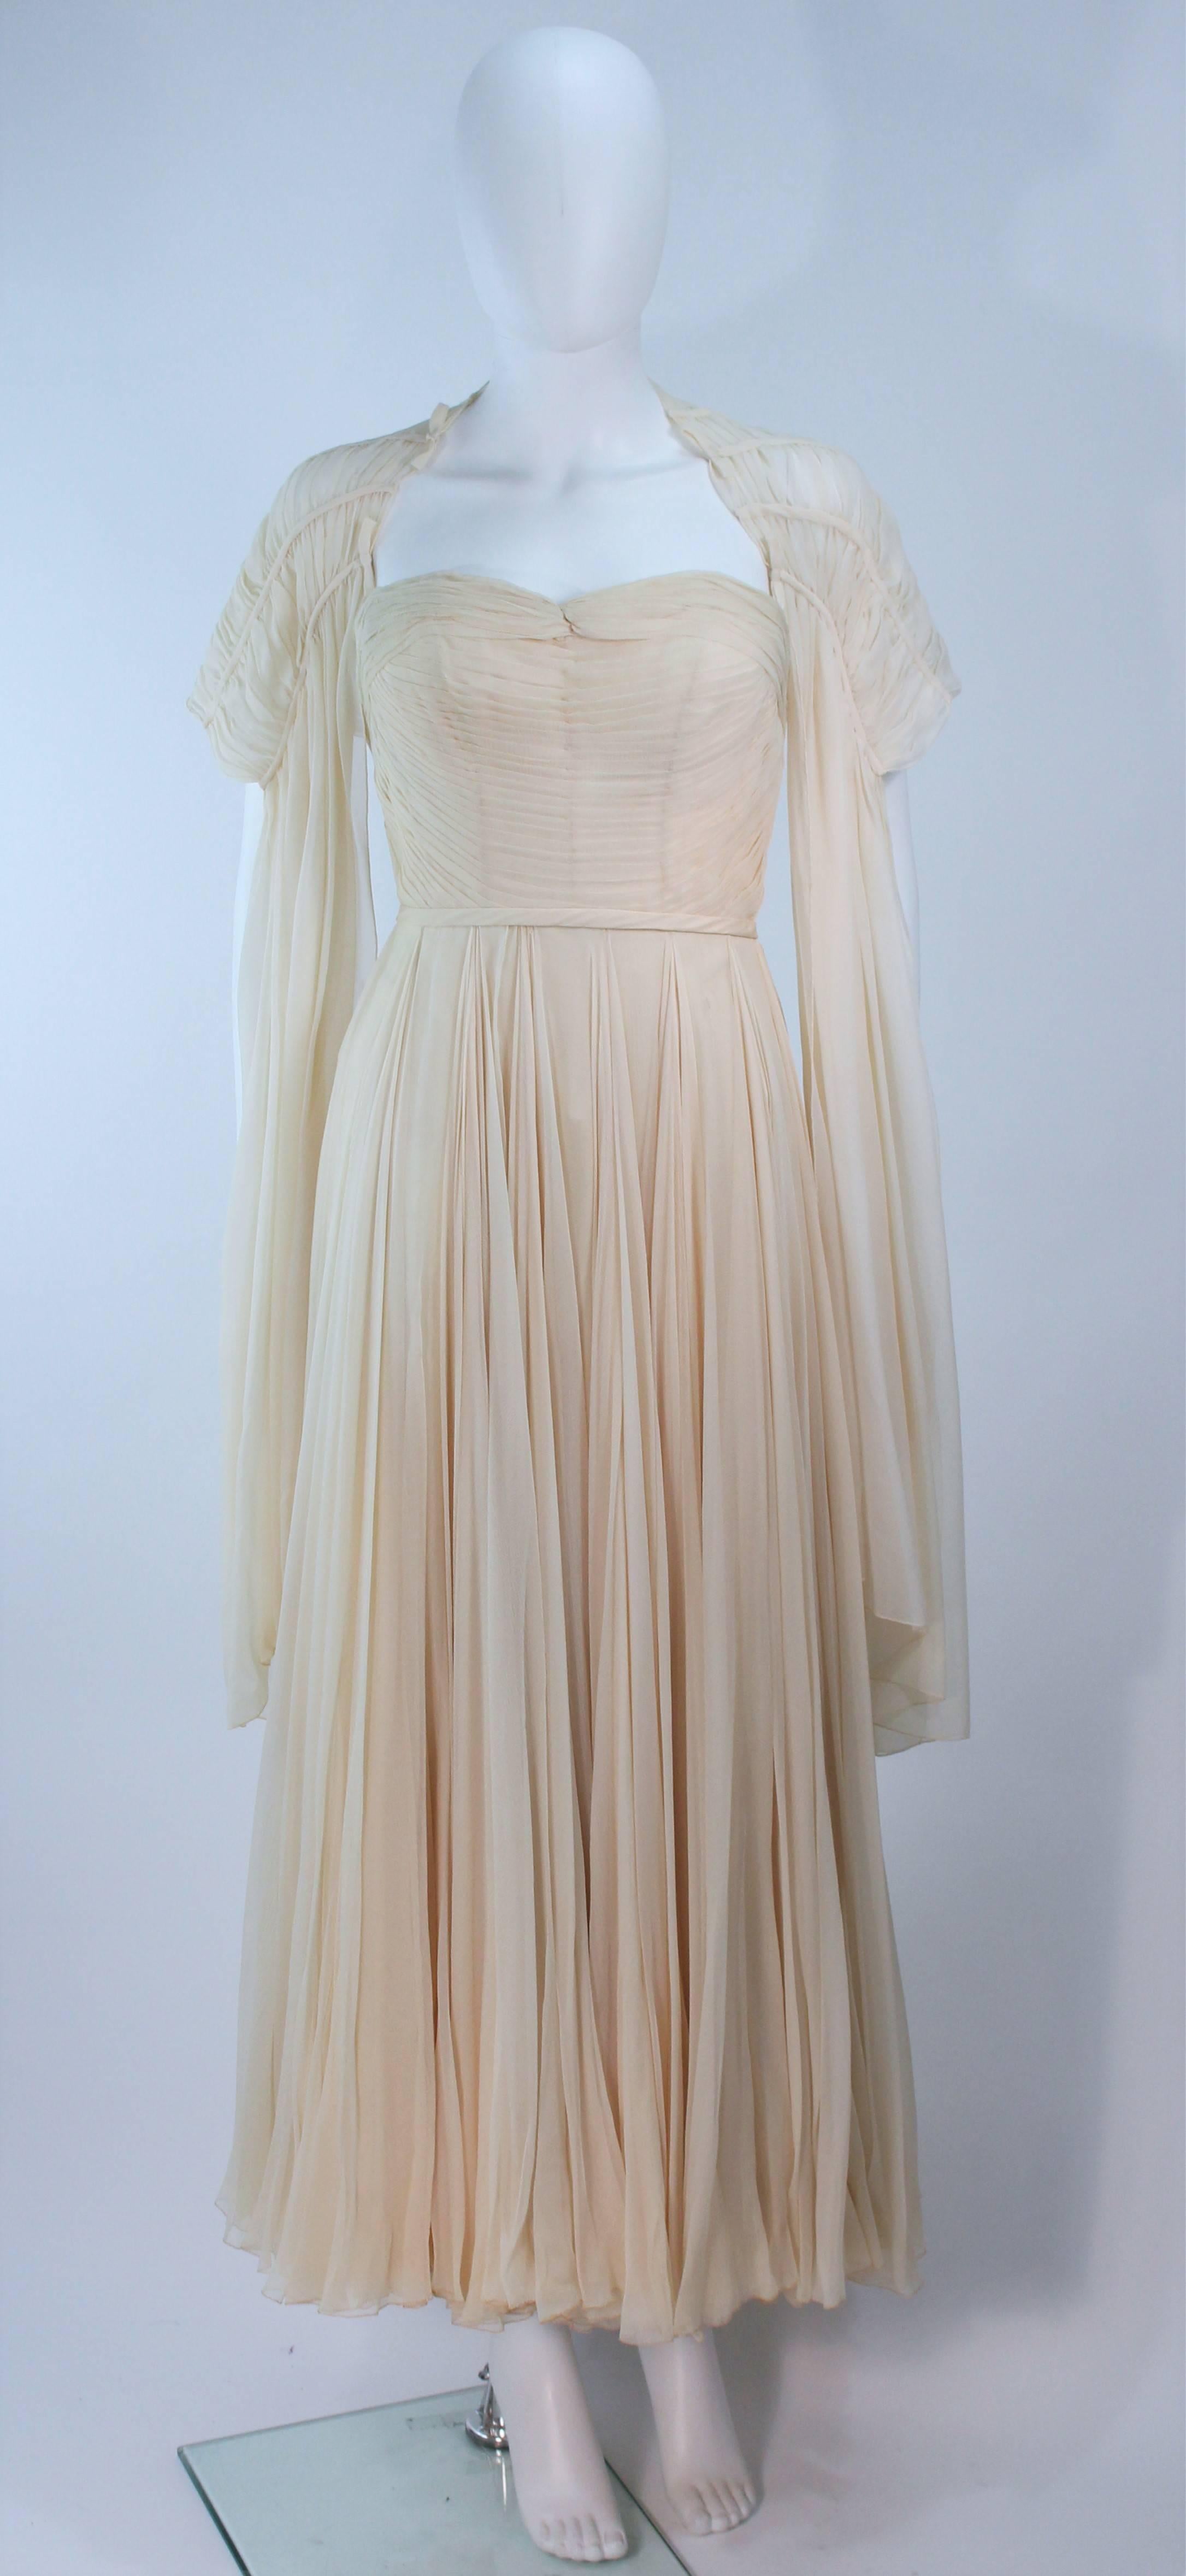 This gown and wrap are composed of an off white, cream hued silk. Features a gathered bodice with pleated full skirt. There is interior boning and zipper closures. The wrap has a gathered draped design with bow accents. In excellent vintage